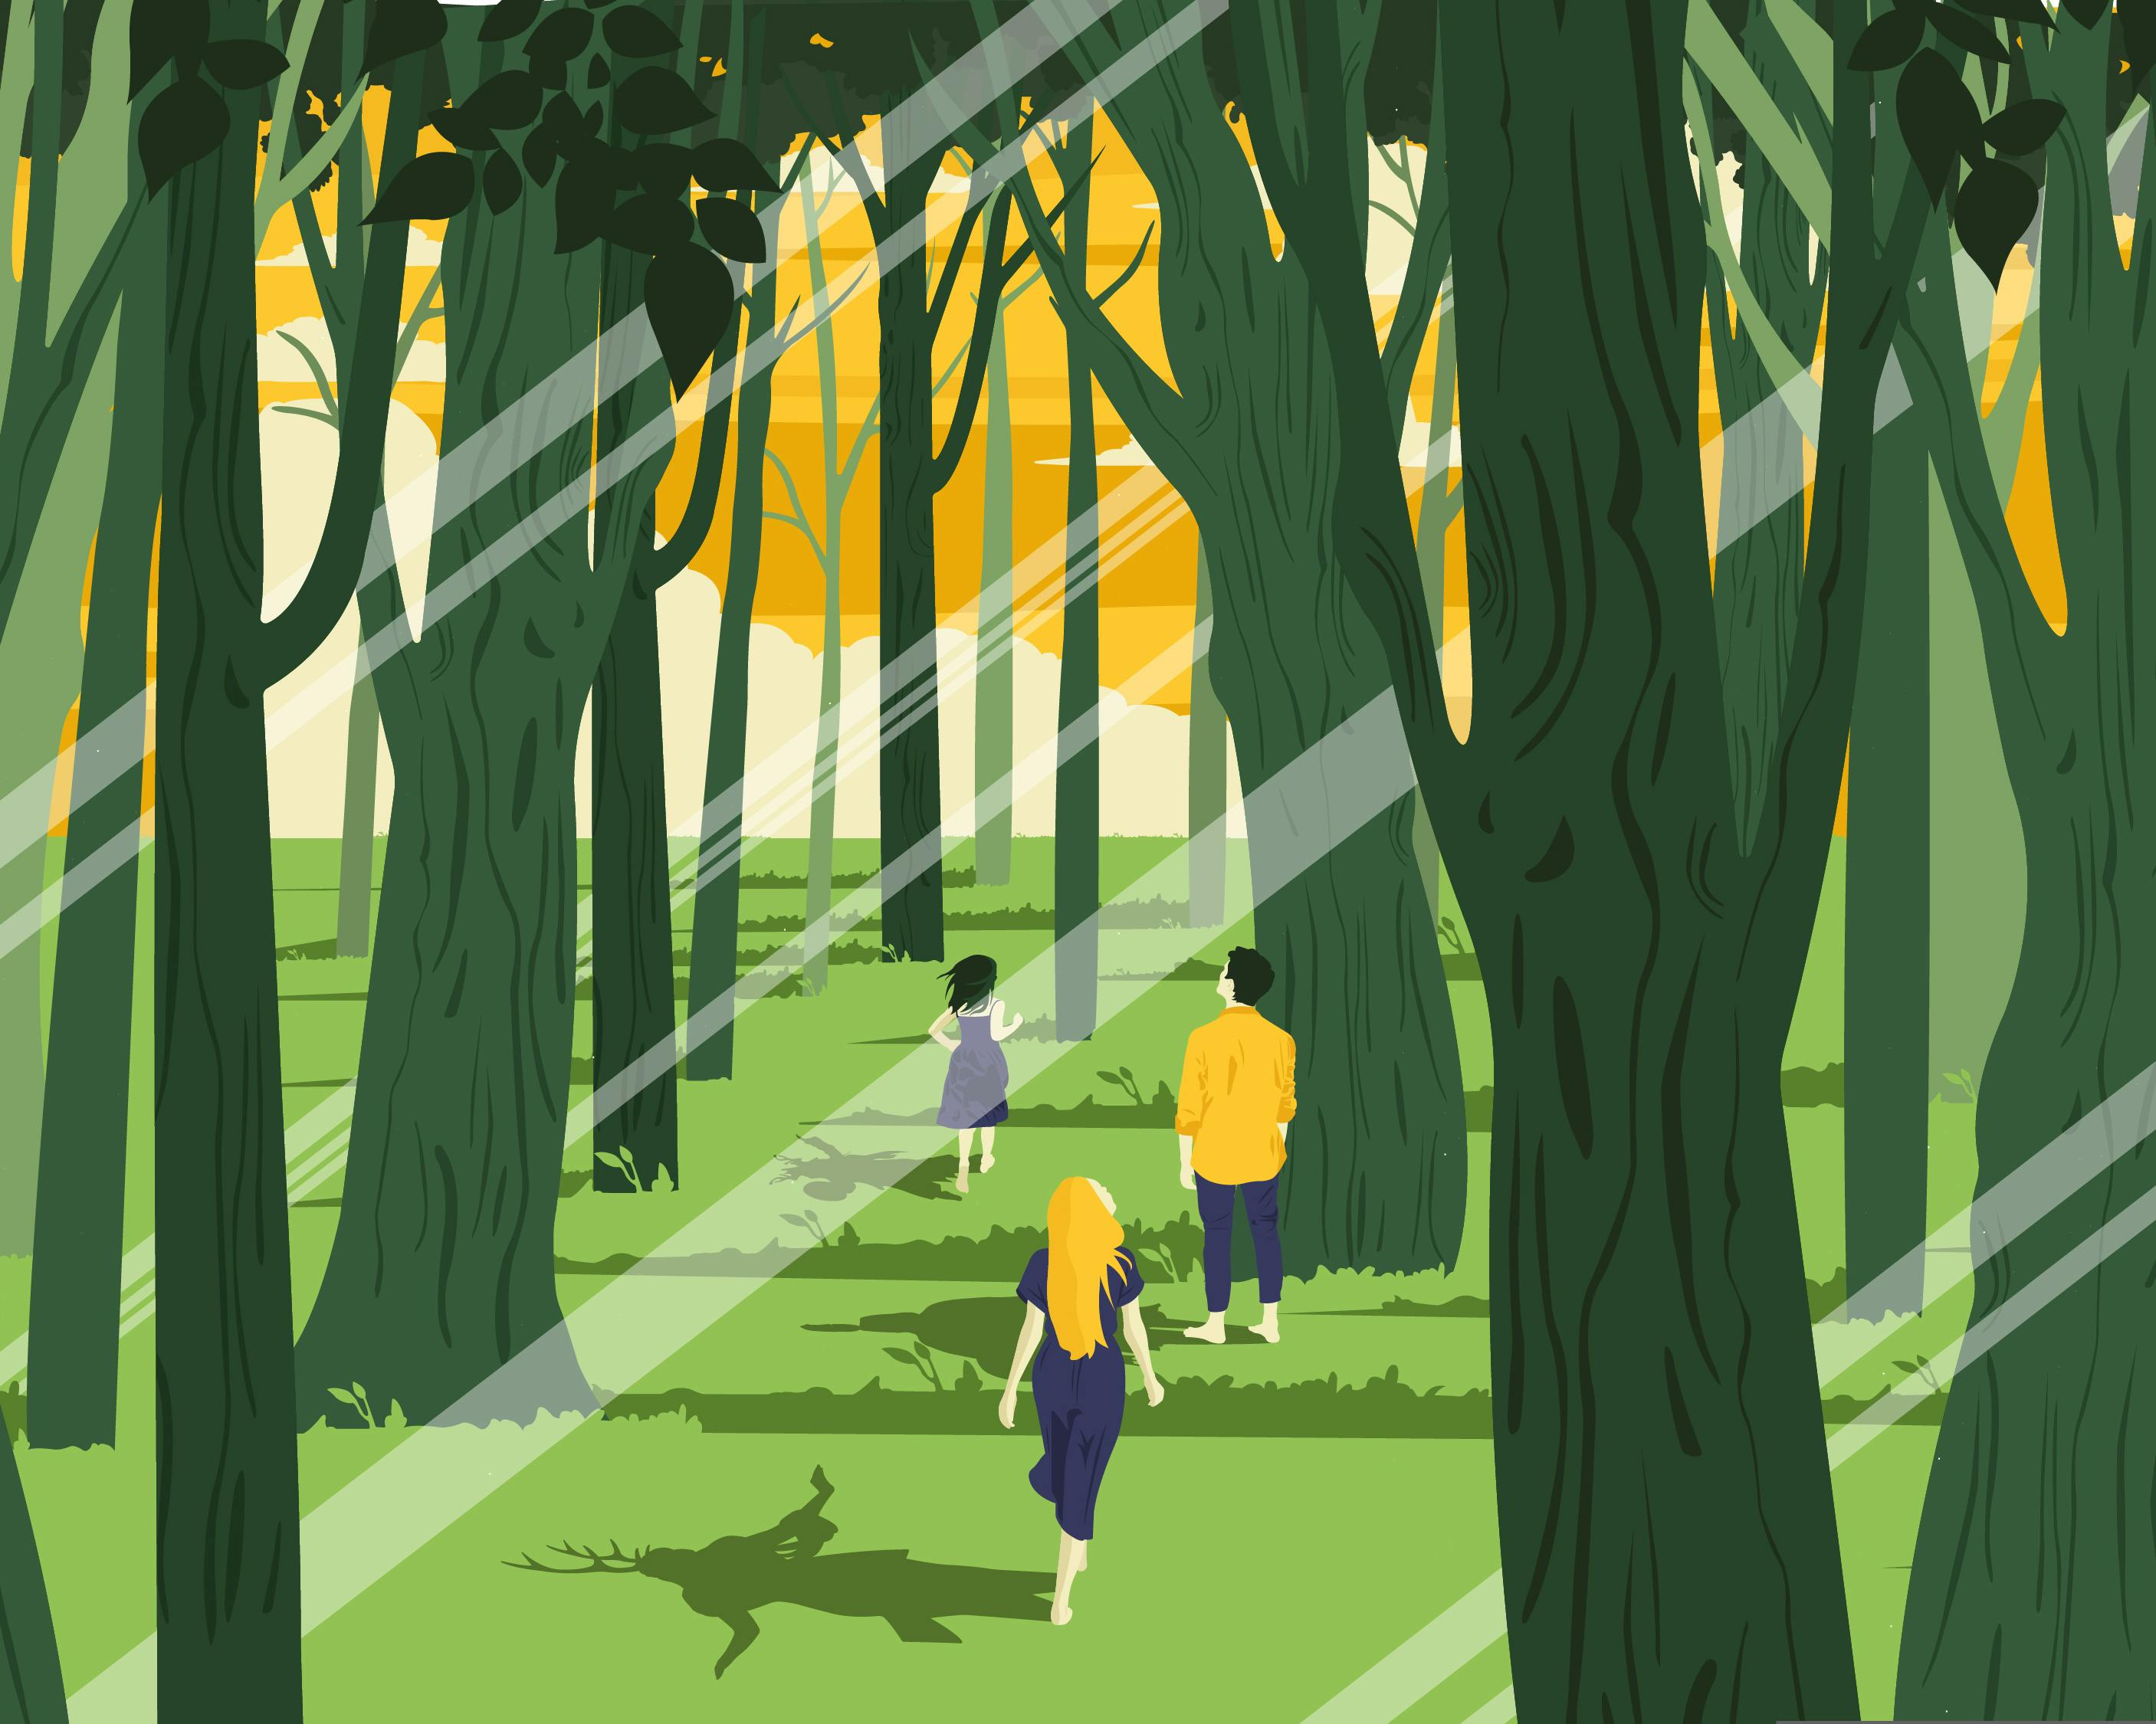 The illustration depicts a forest at sunset. Three young figures are walking through it; they are looking towards the horizon, we see their backs. The shadows they cast on the ground reveal enchanted beings, somewhere between ritual and magic.